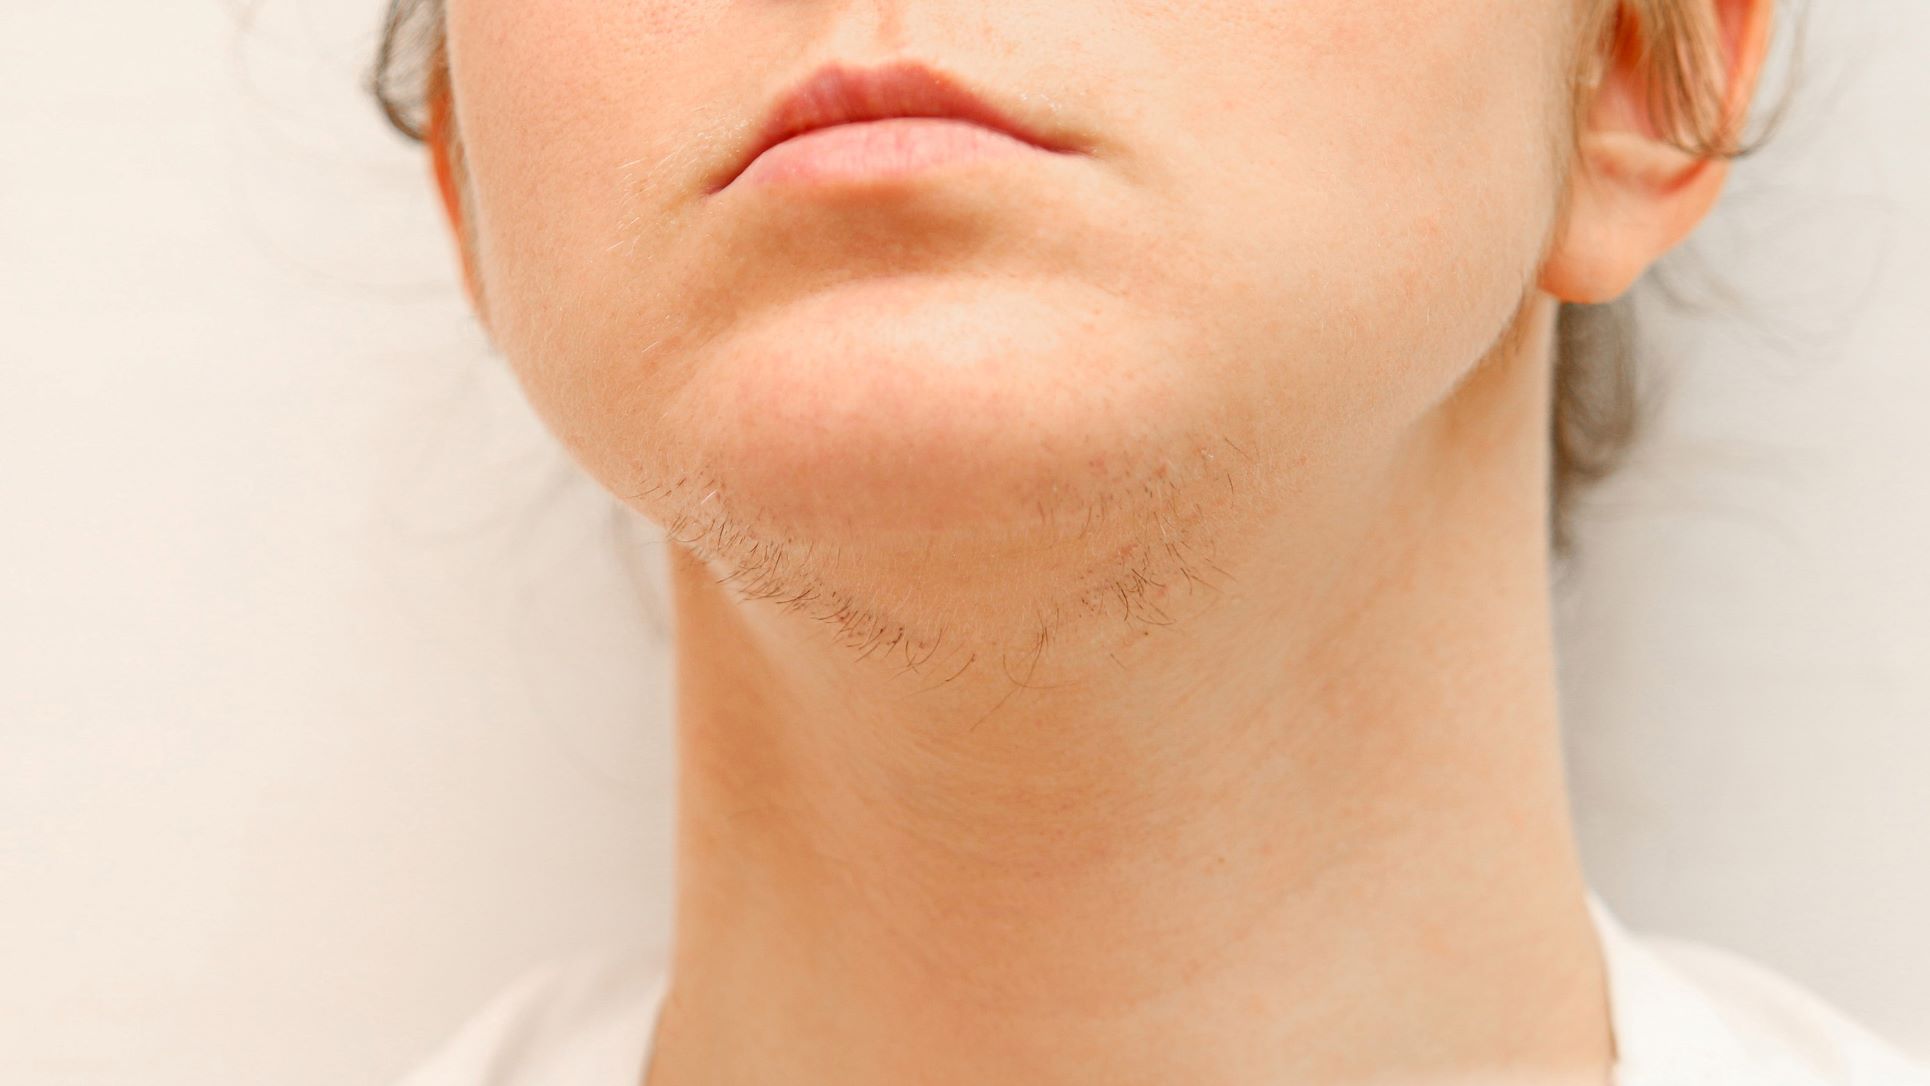 Excessive Facial Hair In Girls: Causes And How To Get Rid Of It